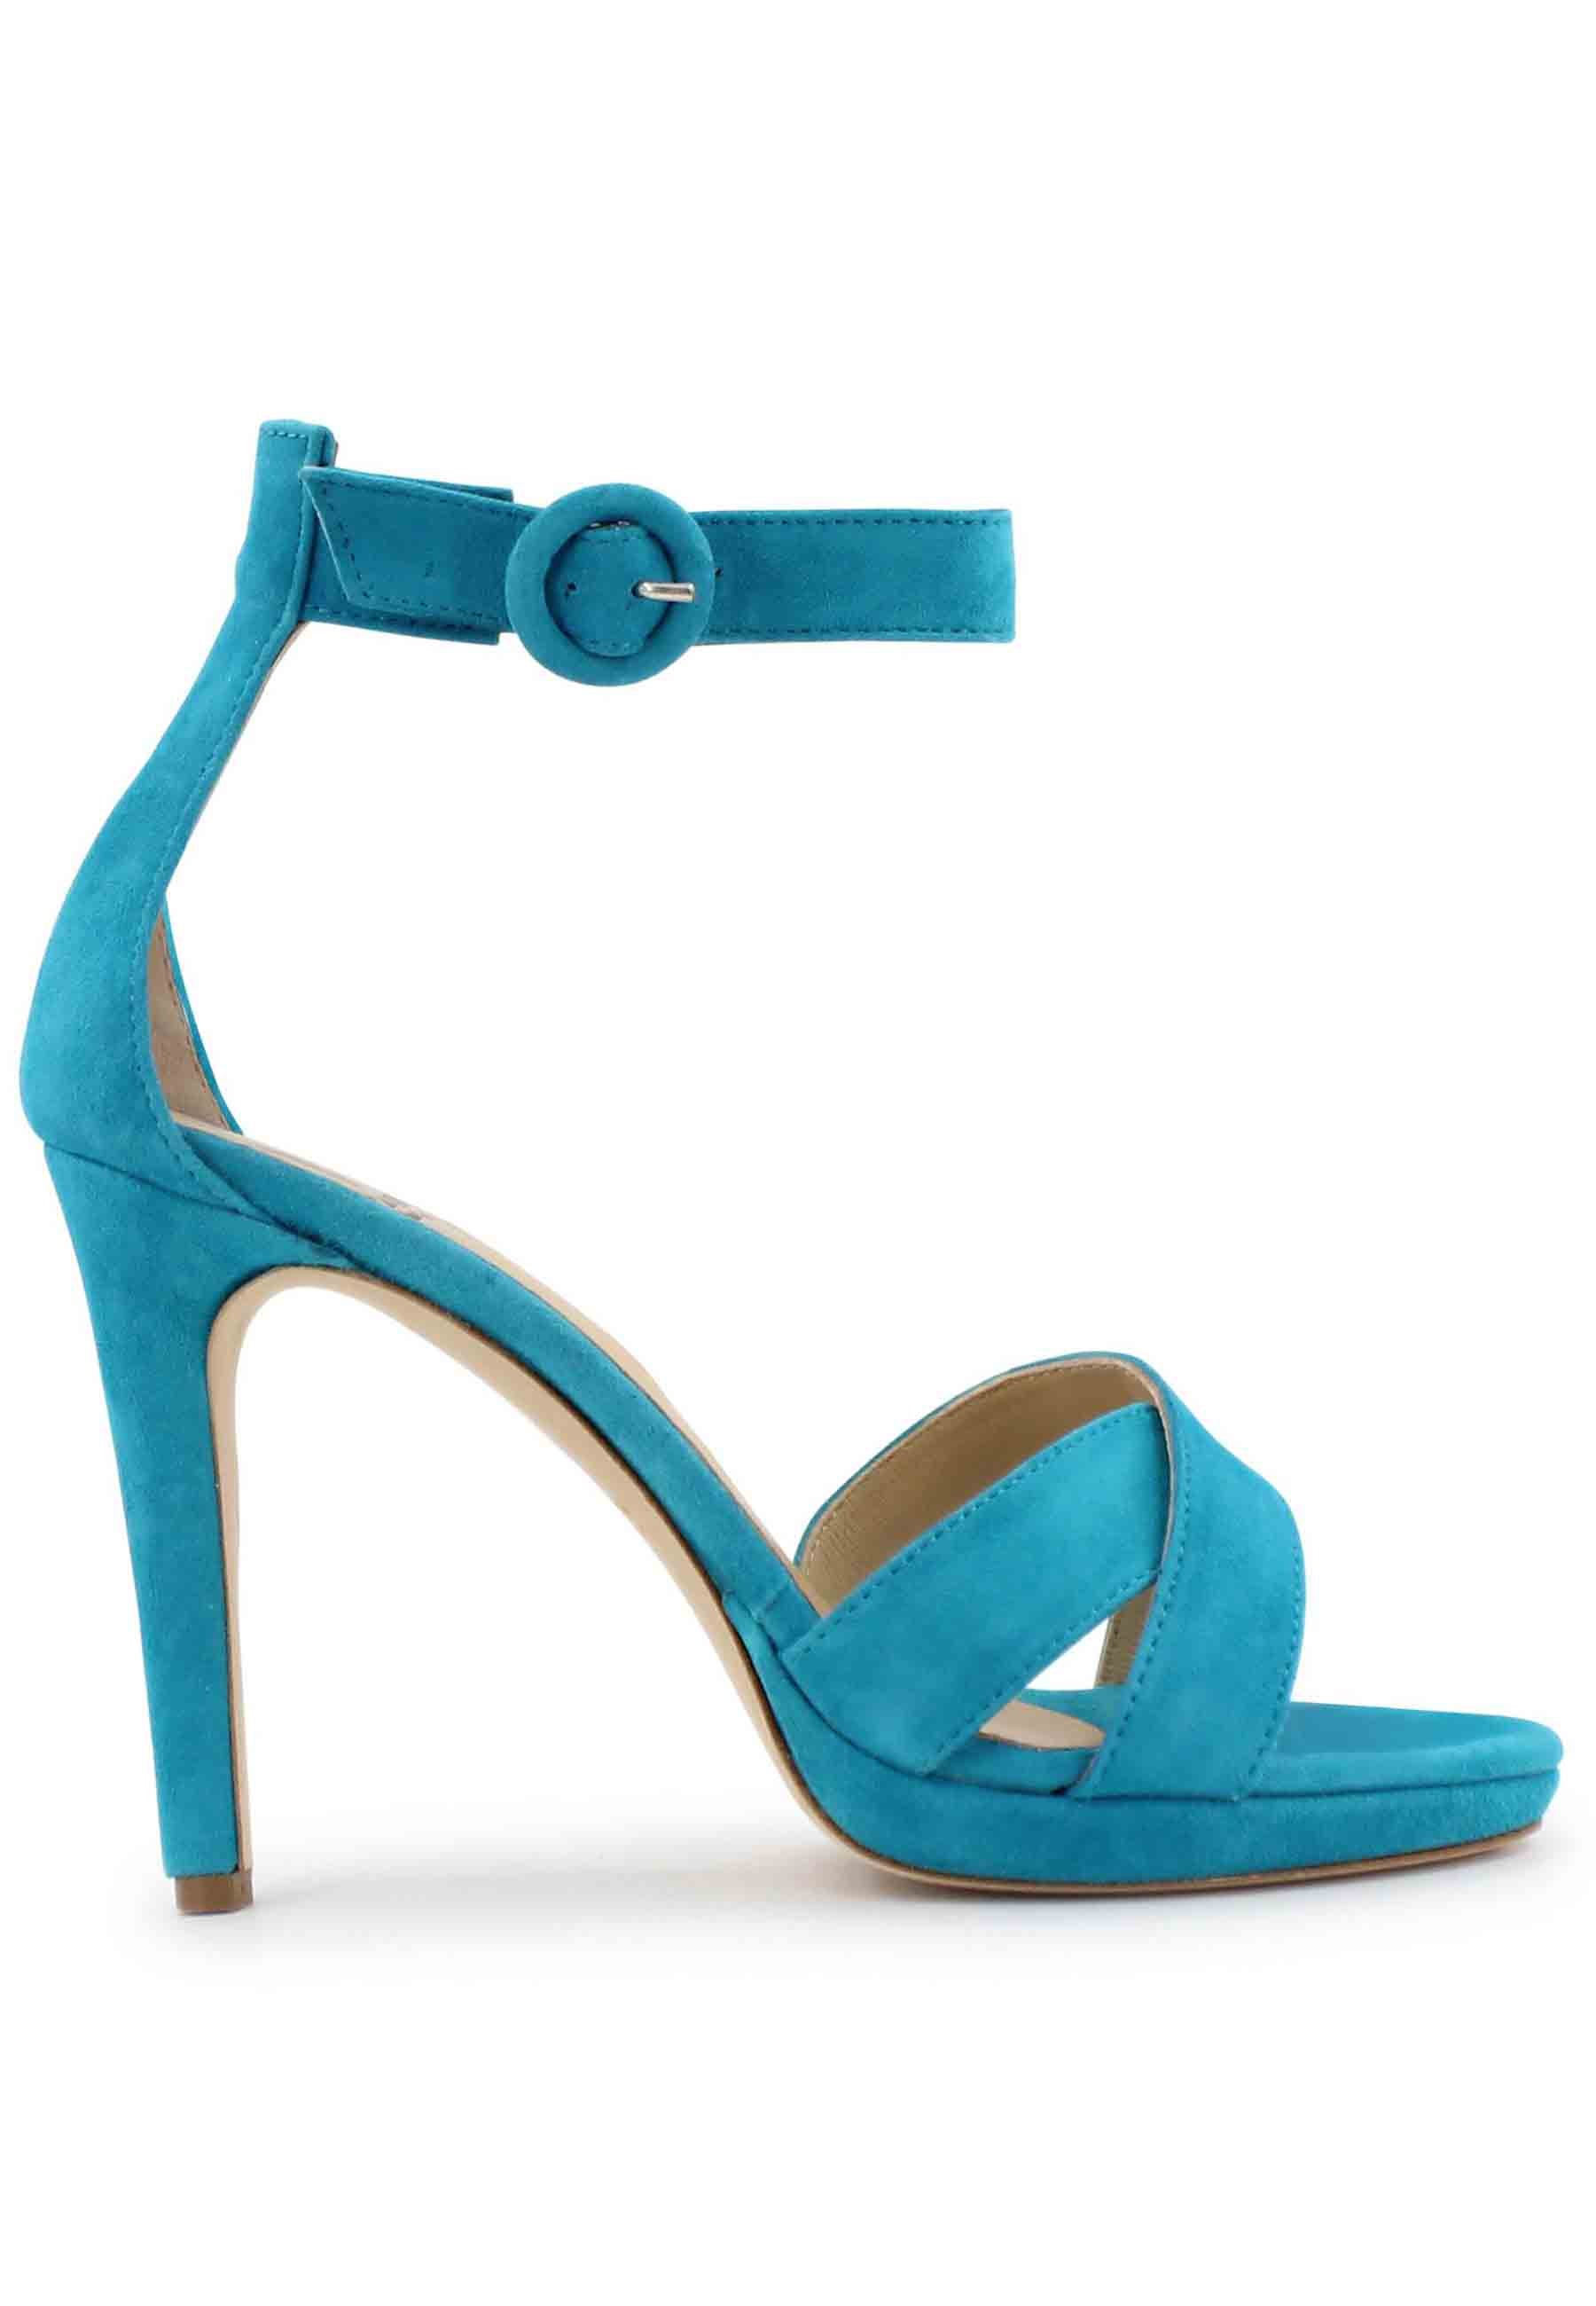 Women's sandals in light blue leather with high heel and ankle strap